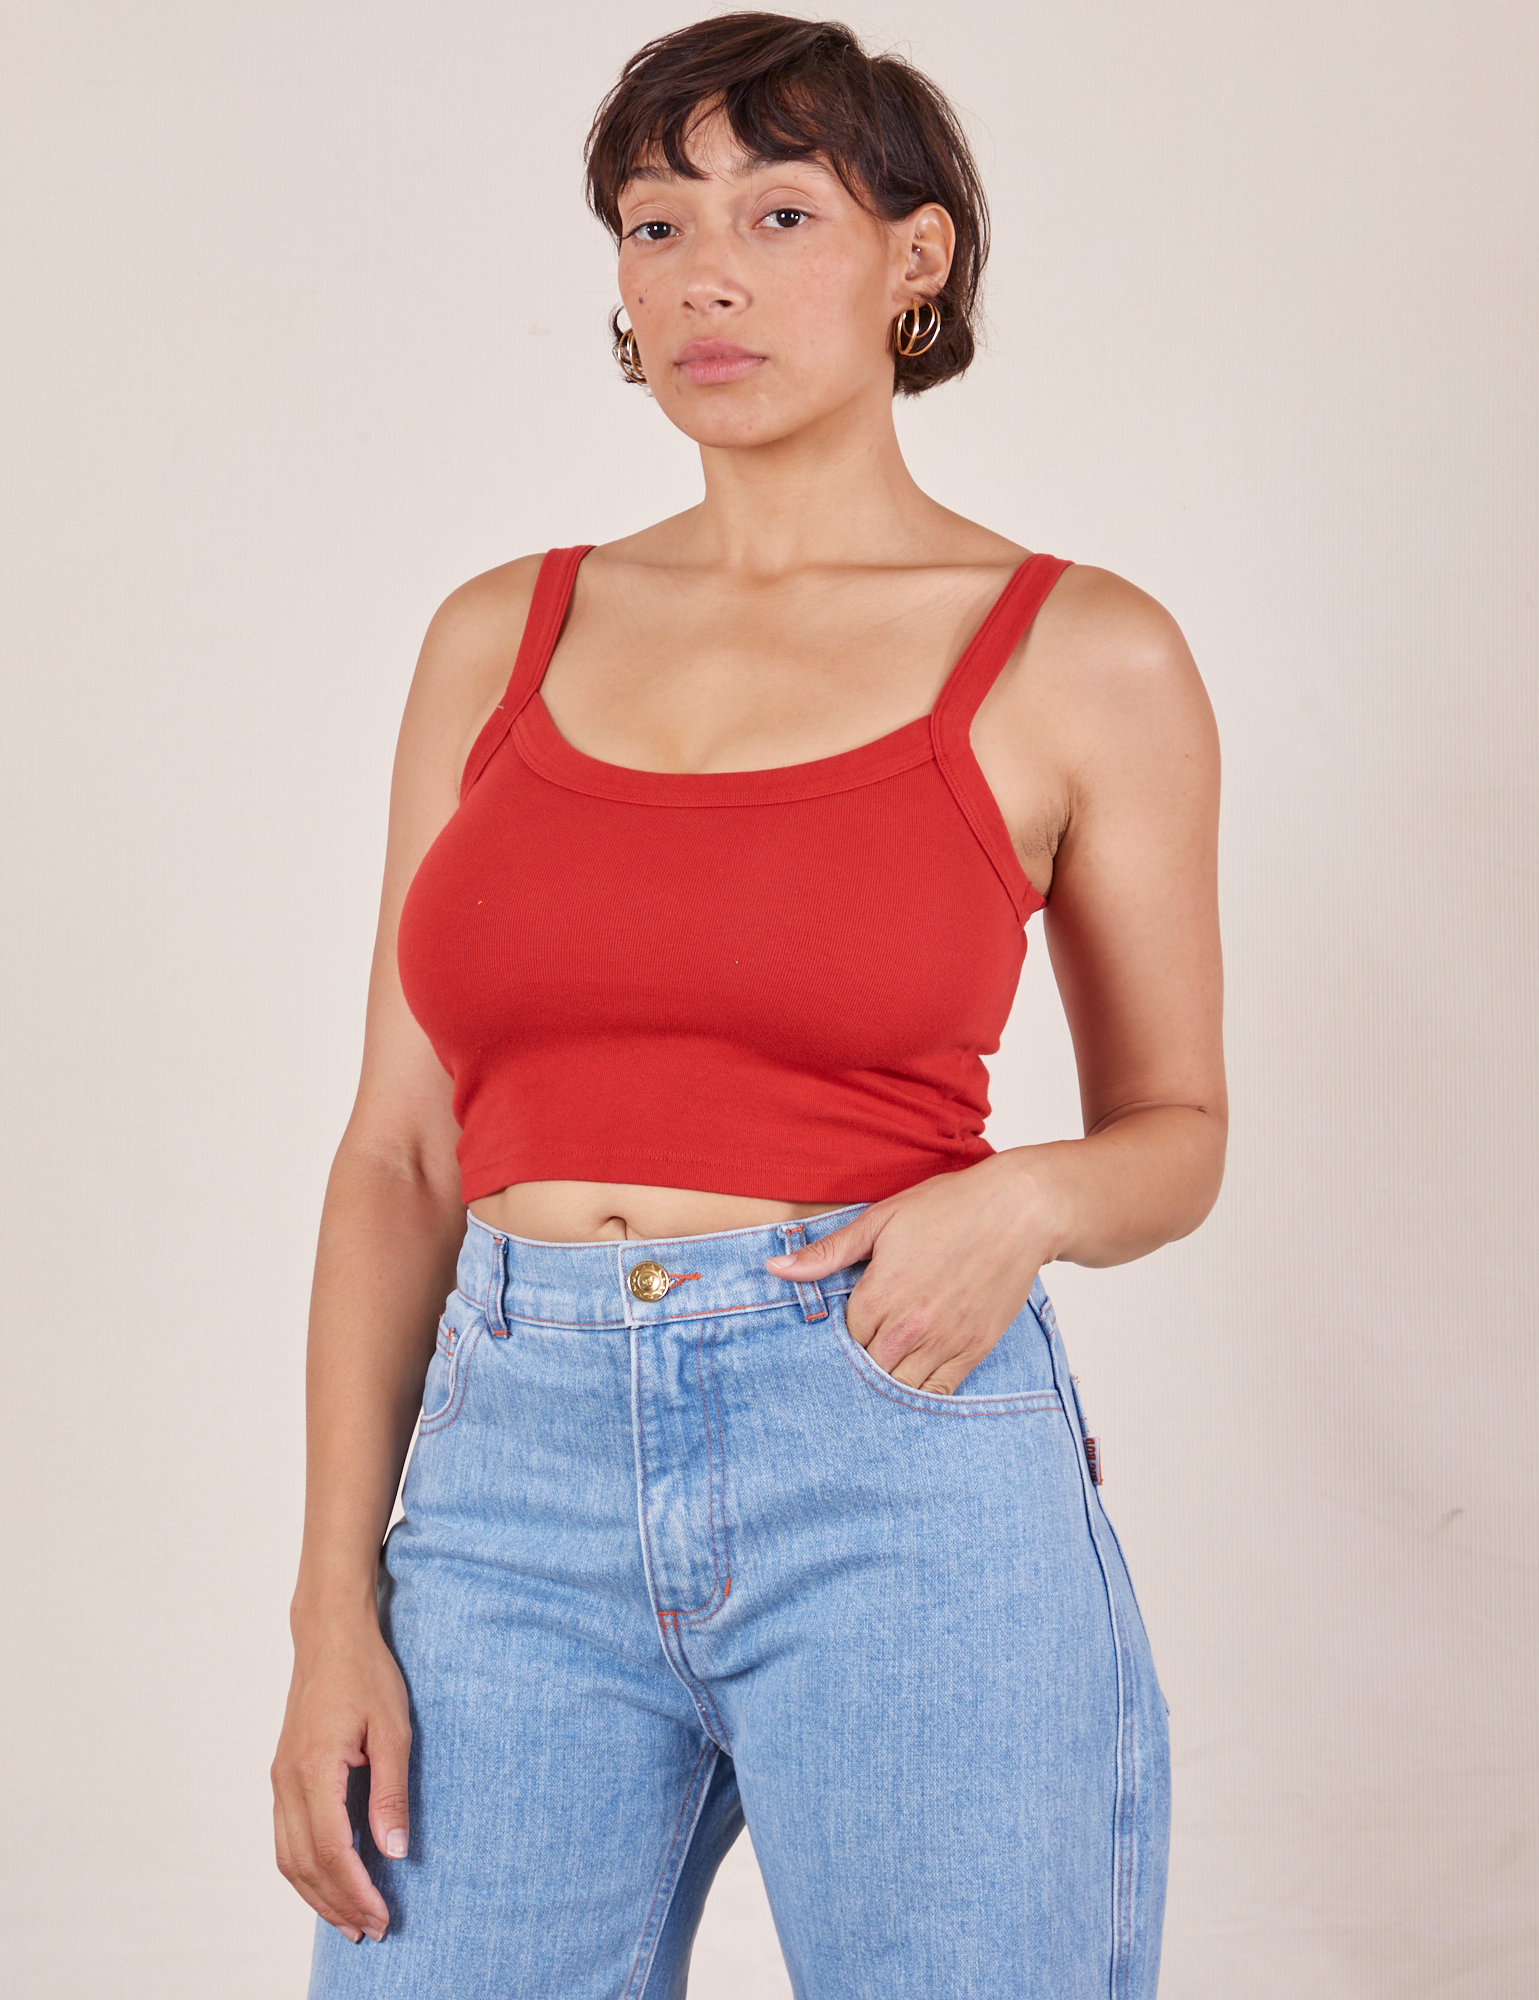 Tiara is wearing Cropped Cami in Mustang Red and light wash Sailor Jeans